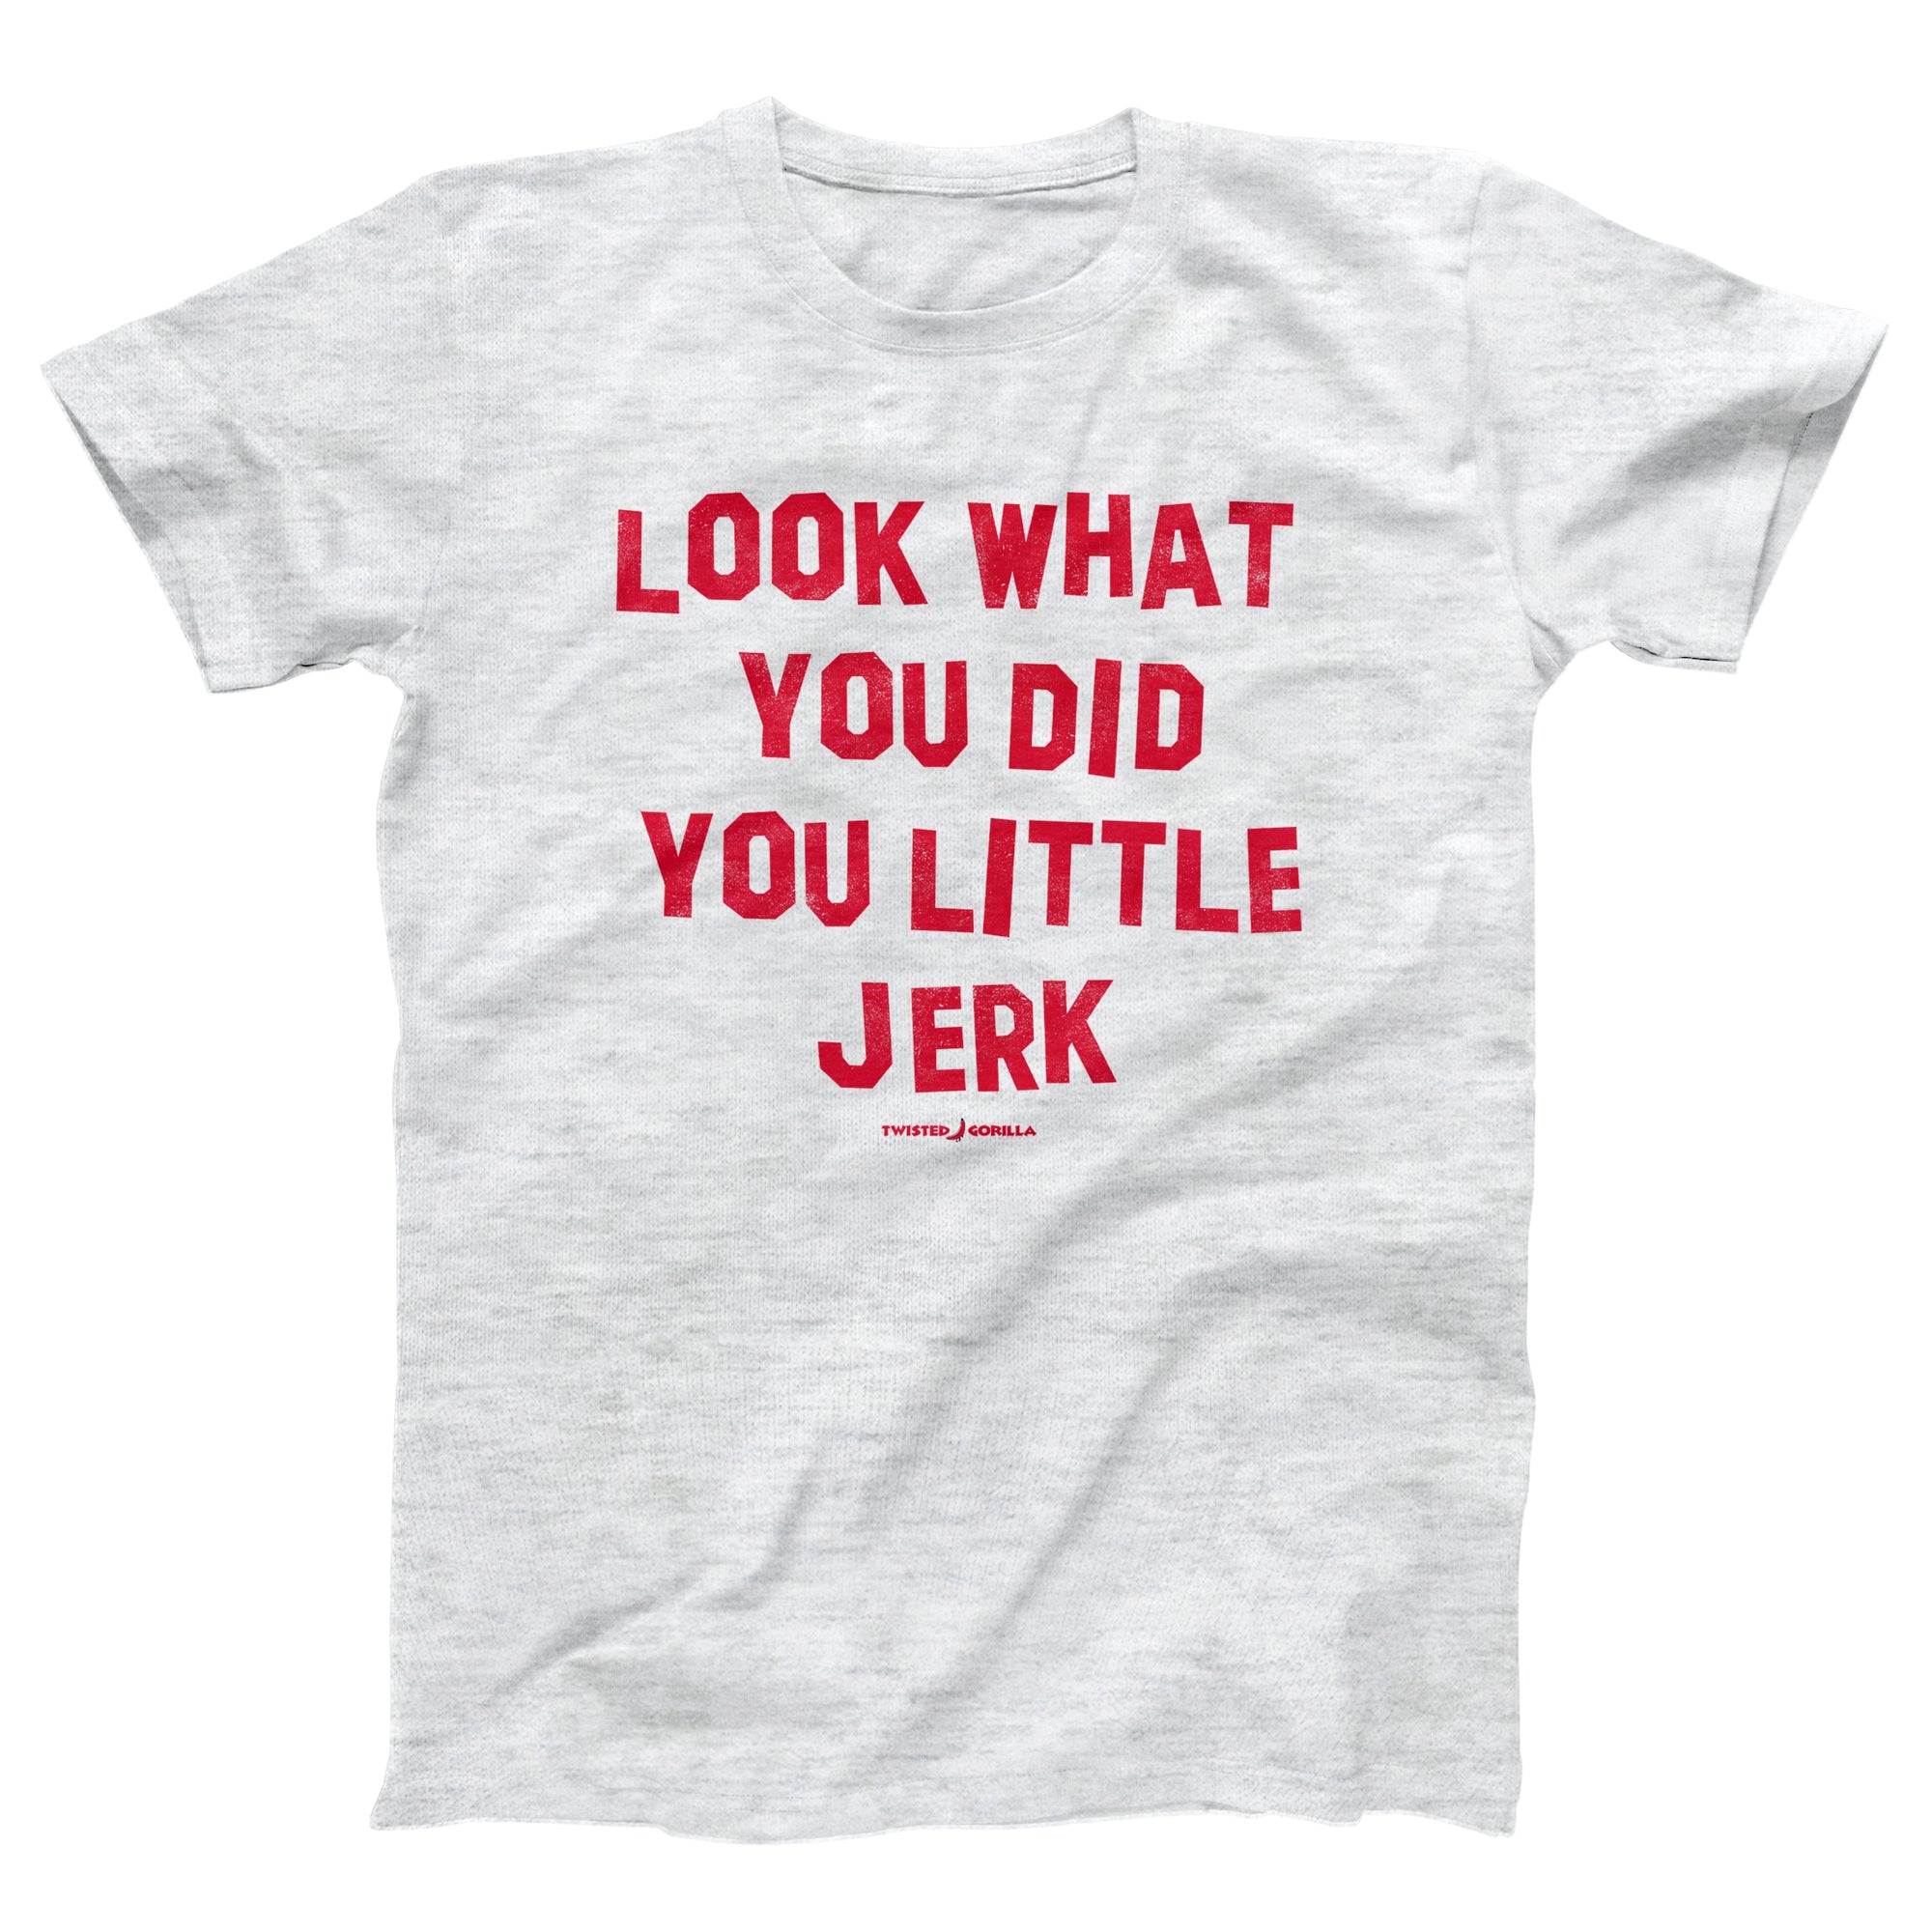 Look What You Did You Little Jerk Adult Unisex T-Shirt - anishphilip